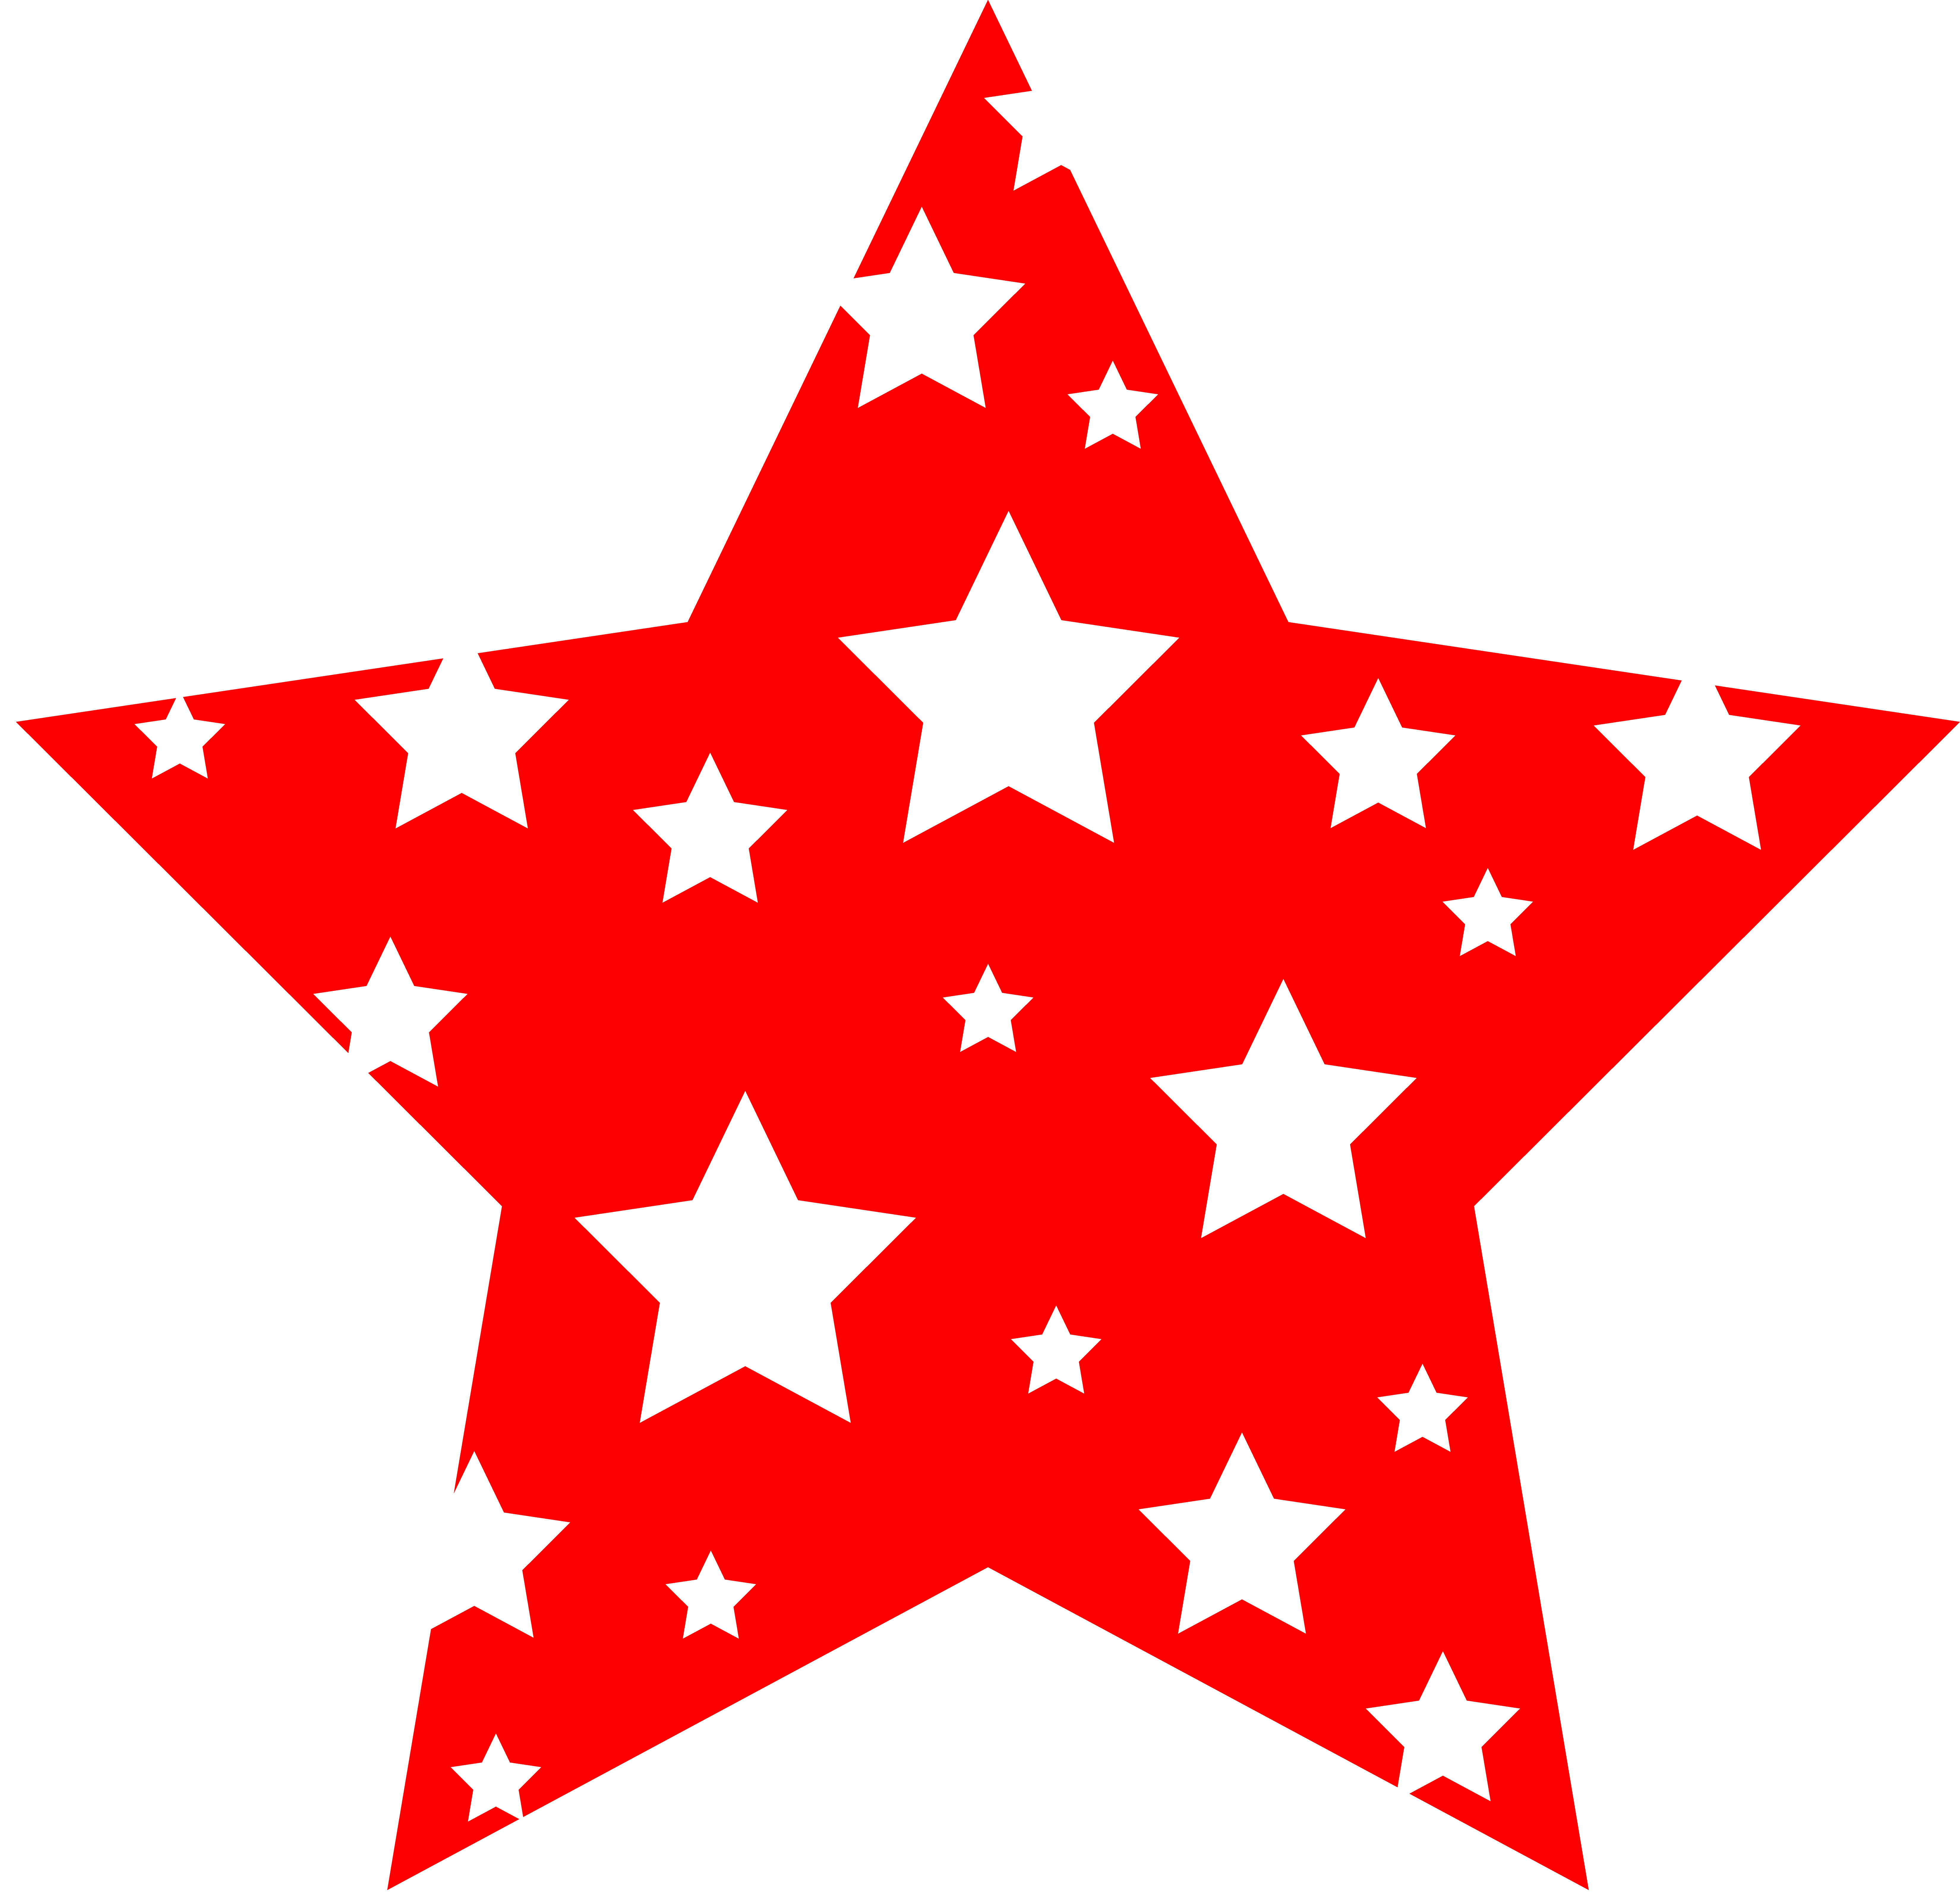 White and Red Star Logo - Free Red Star Picture, Download Free Clip Art, Free Clip Art on ...